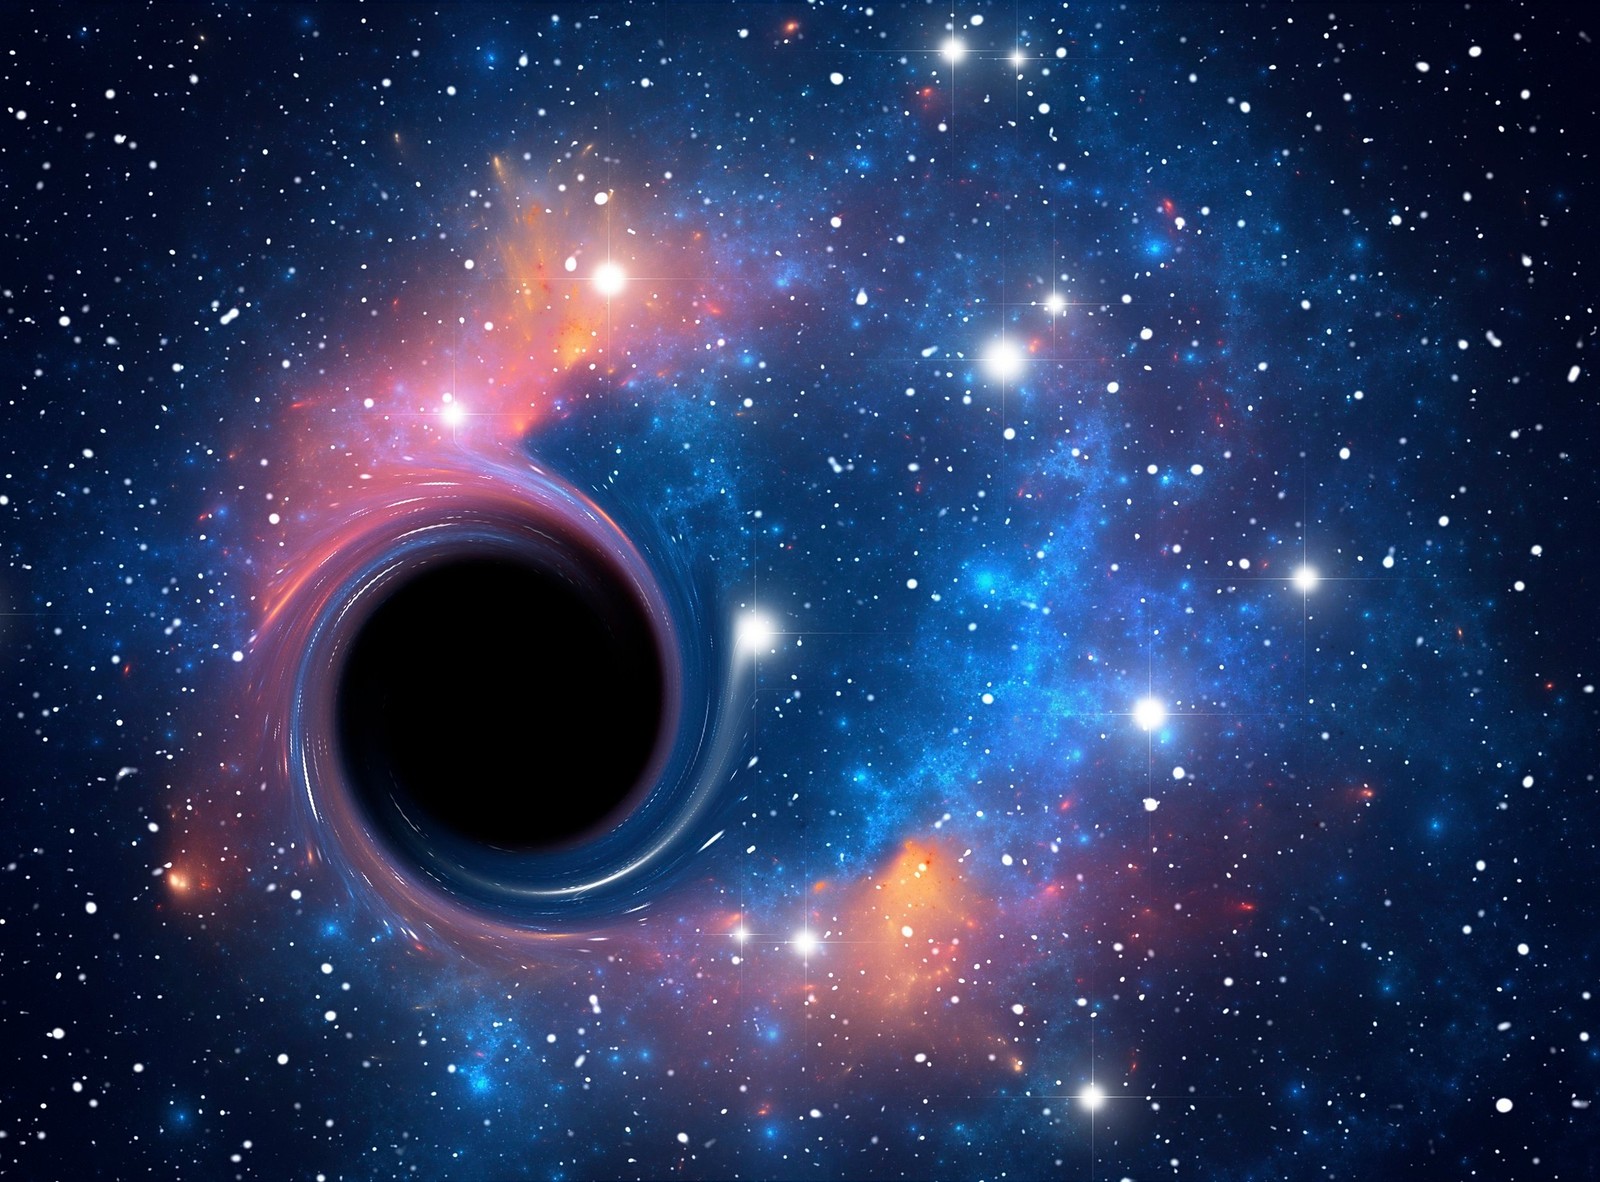 Seeing the Invisible: Deep Space & Black Holes at The Greenbank